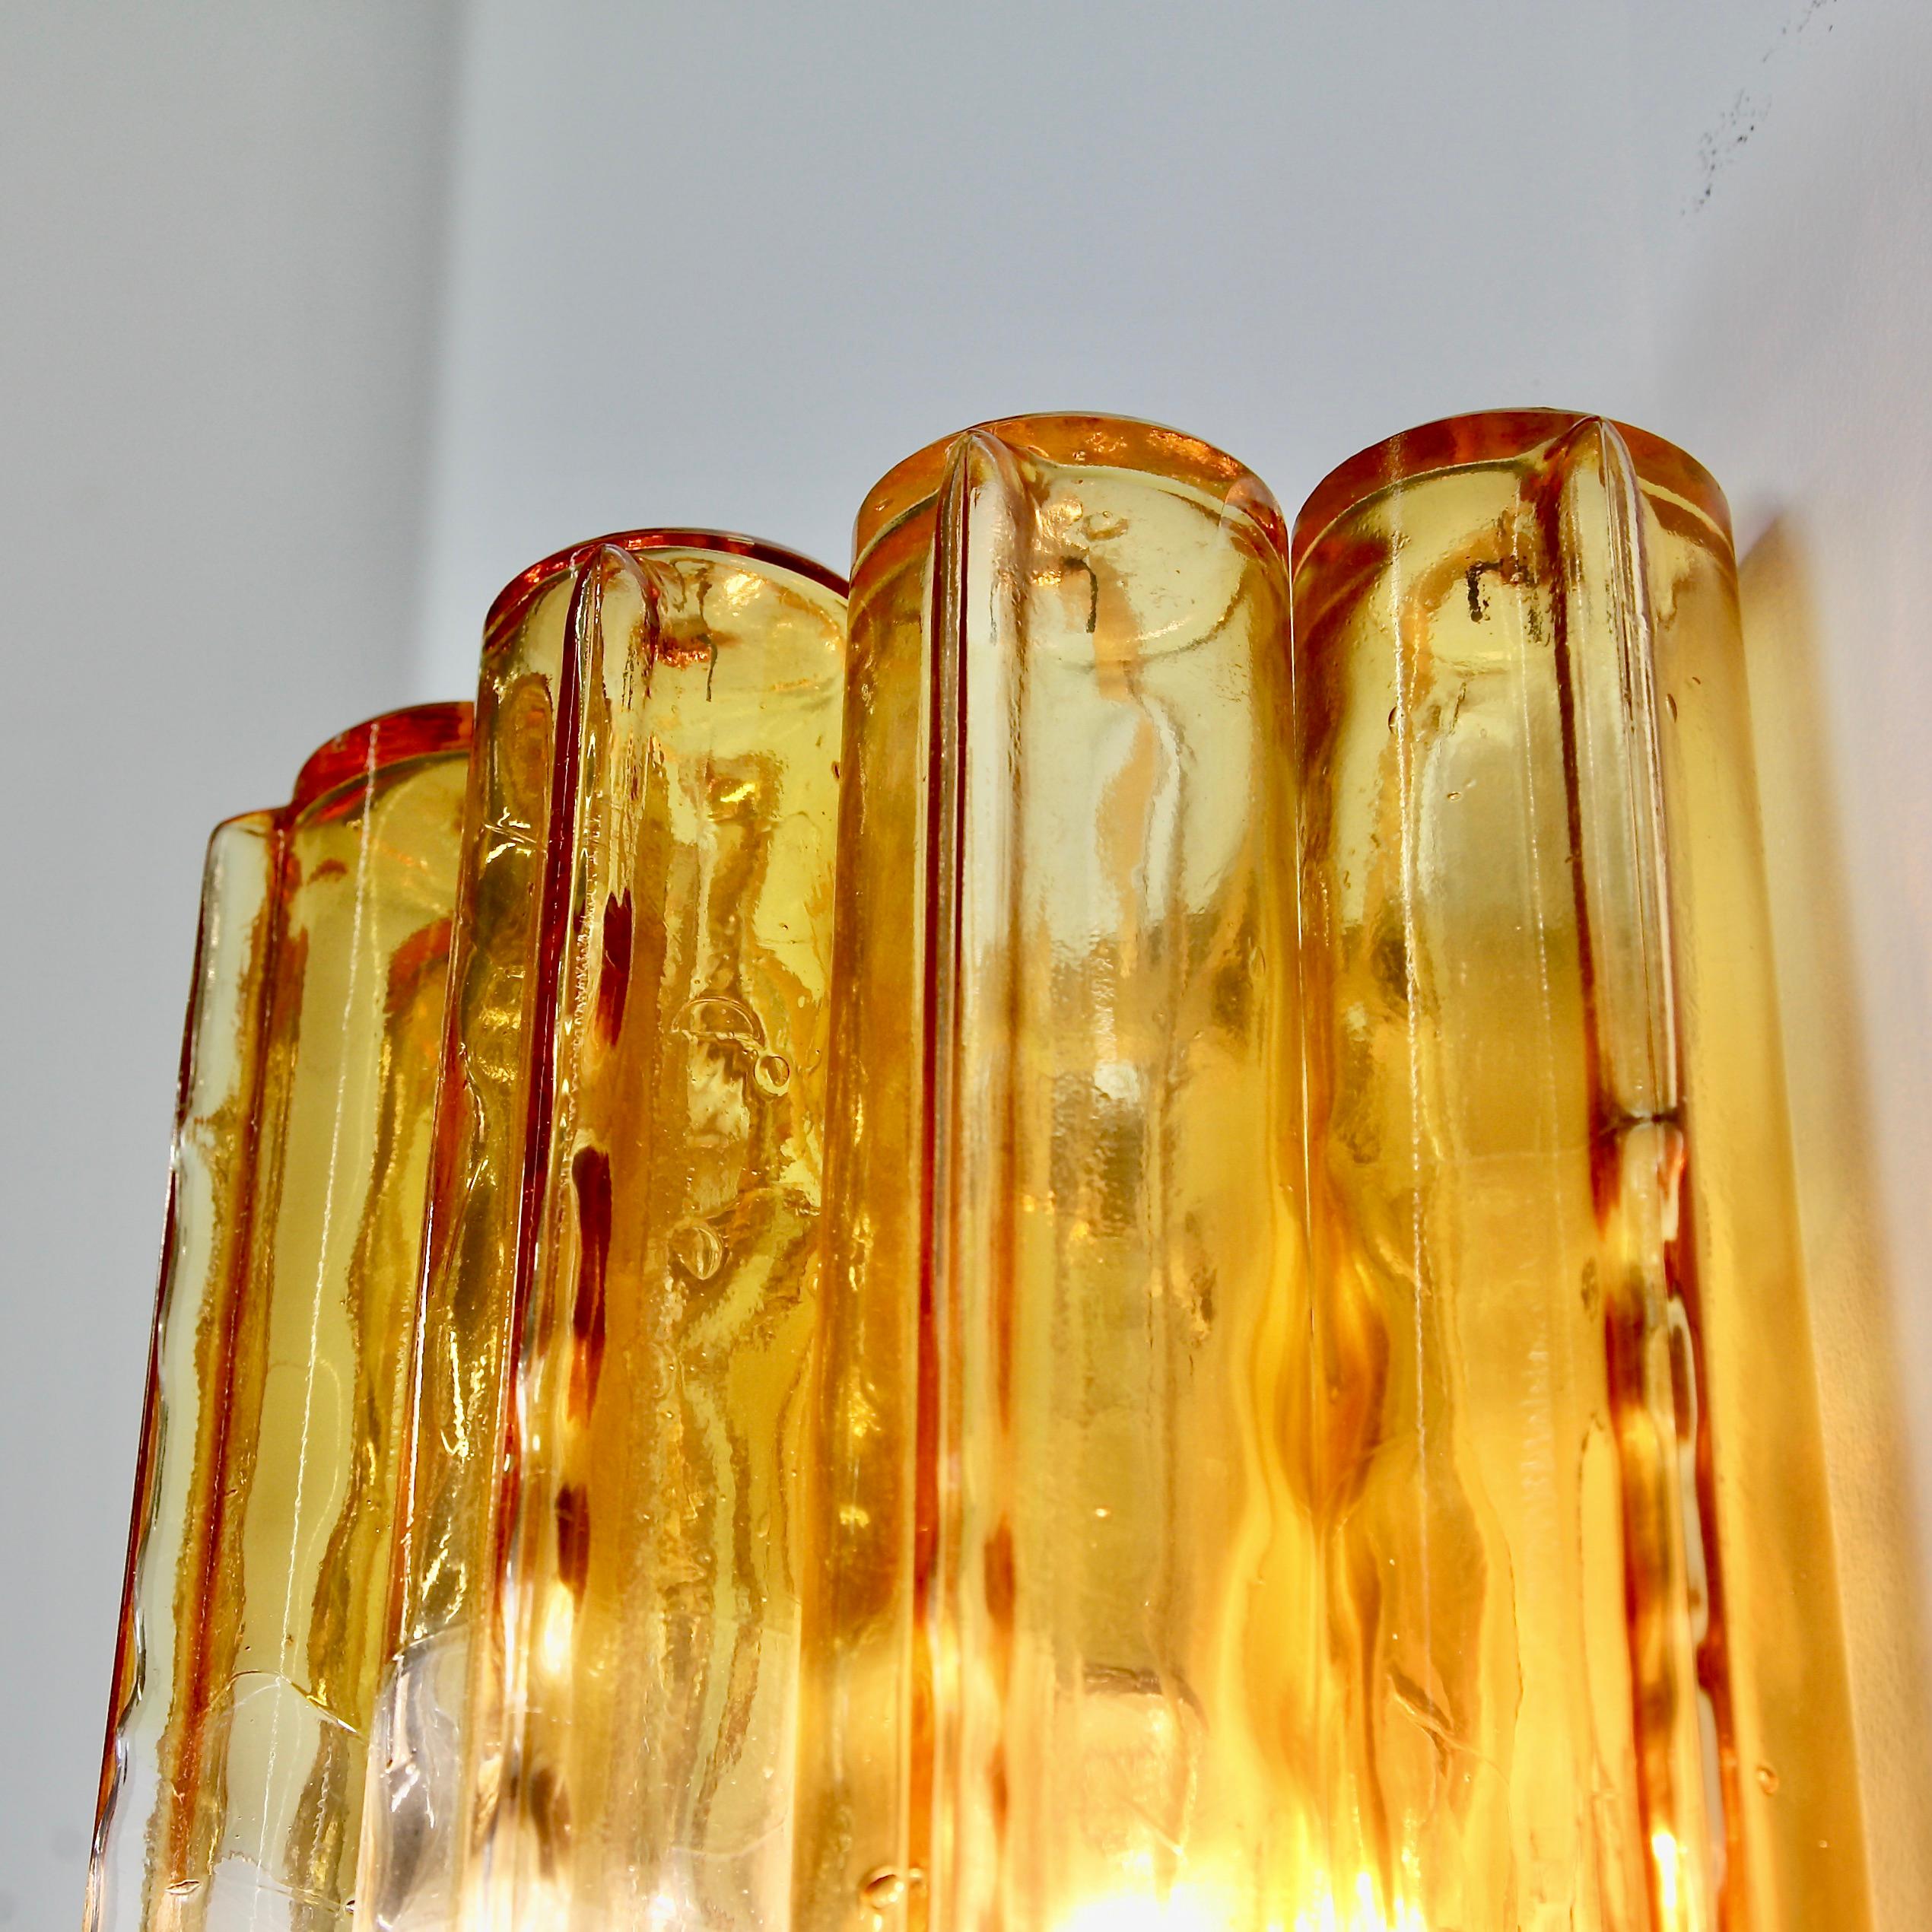 Pair of early original Venini glass wall sconces. Italy, 1960.

A pair of wall lamps with hand blown 